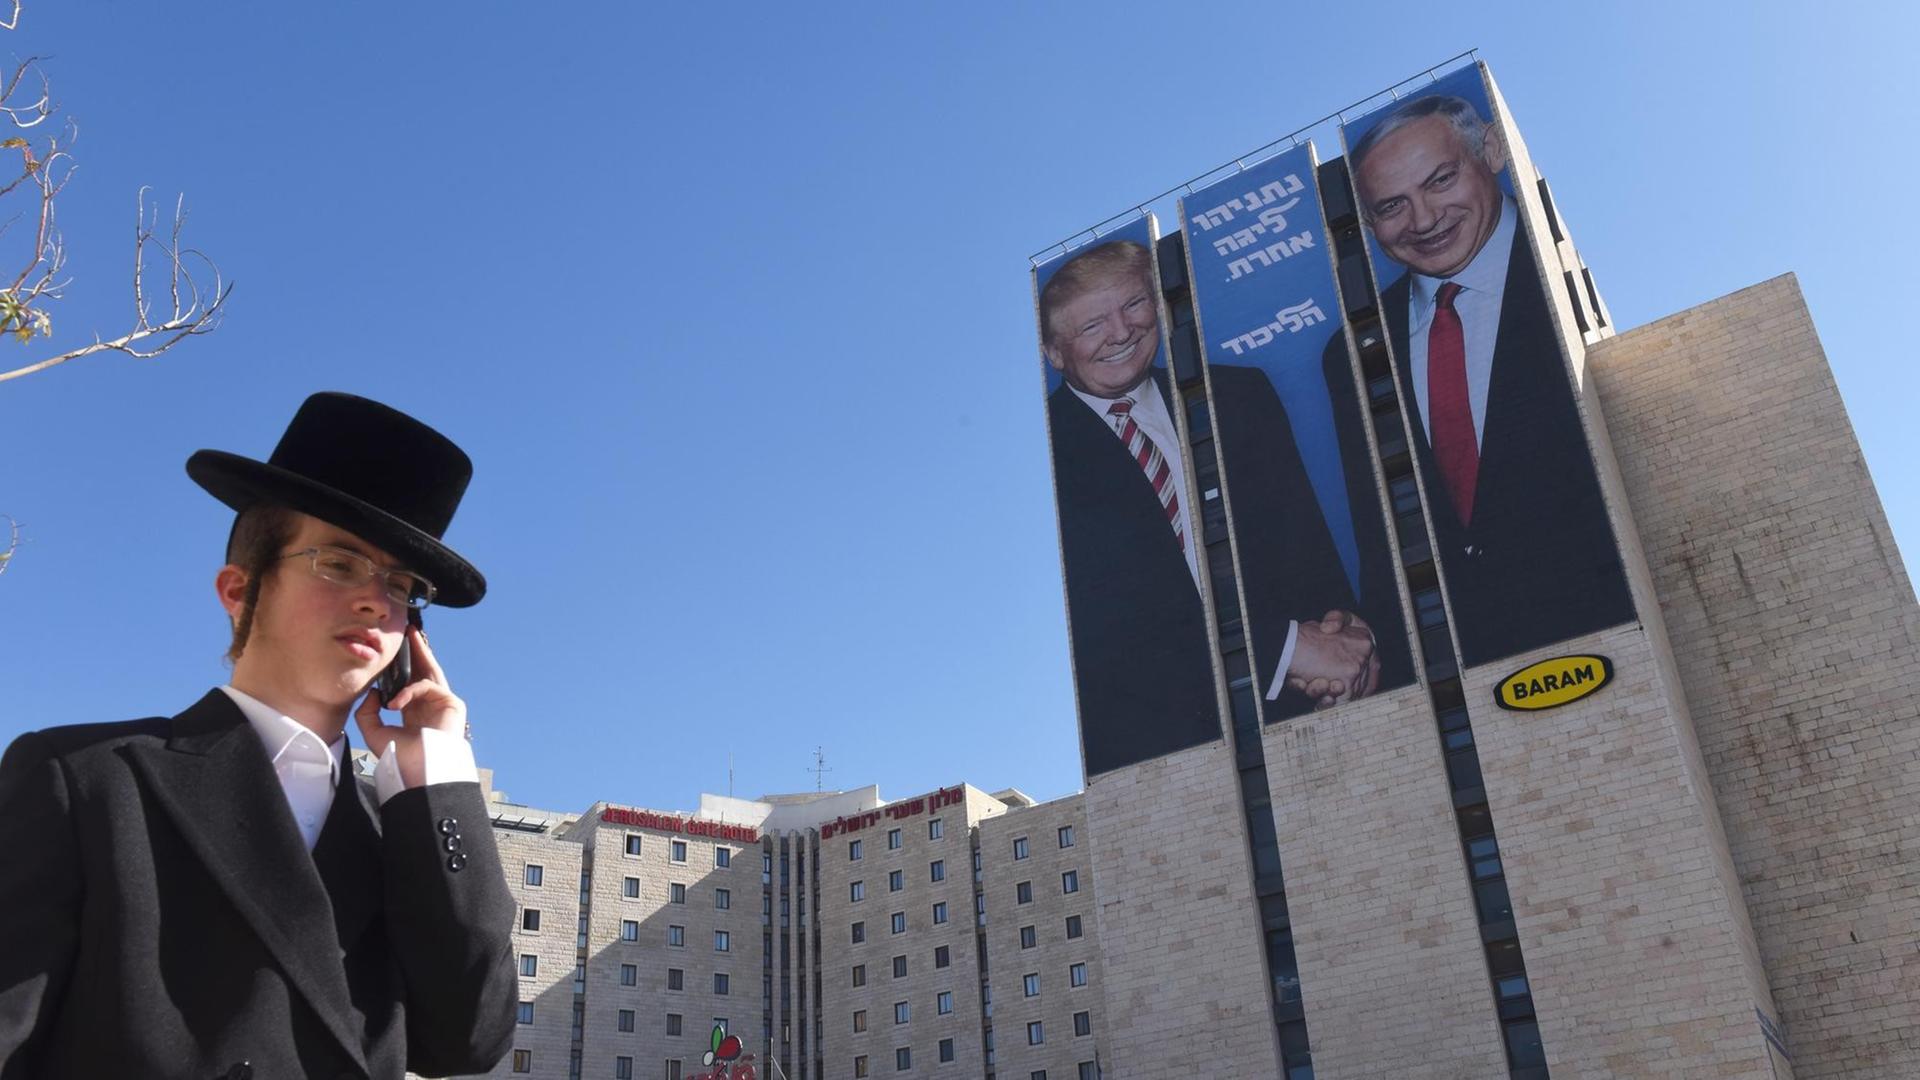 An Ultra-Orthodox Jew walks past a giant election campaign billboard of U.S. President Donald Trump (L) and Israeli Prime Minister Benjamin Netanyahu ( R) shaking hands, at the entrance to Jerusalem, February 4, 2019. The Hebrew writing on the billboard reads " Netanyahu, in another league." Israelis will go to the polls in an early election on April 9, 2019. Photo by Debbie Hill/UPI Photo via Newscom picture alliance |